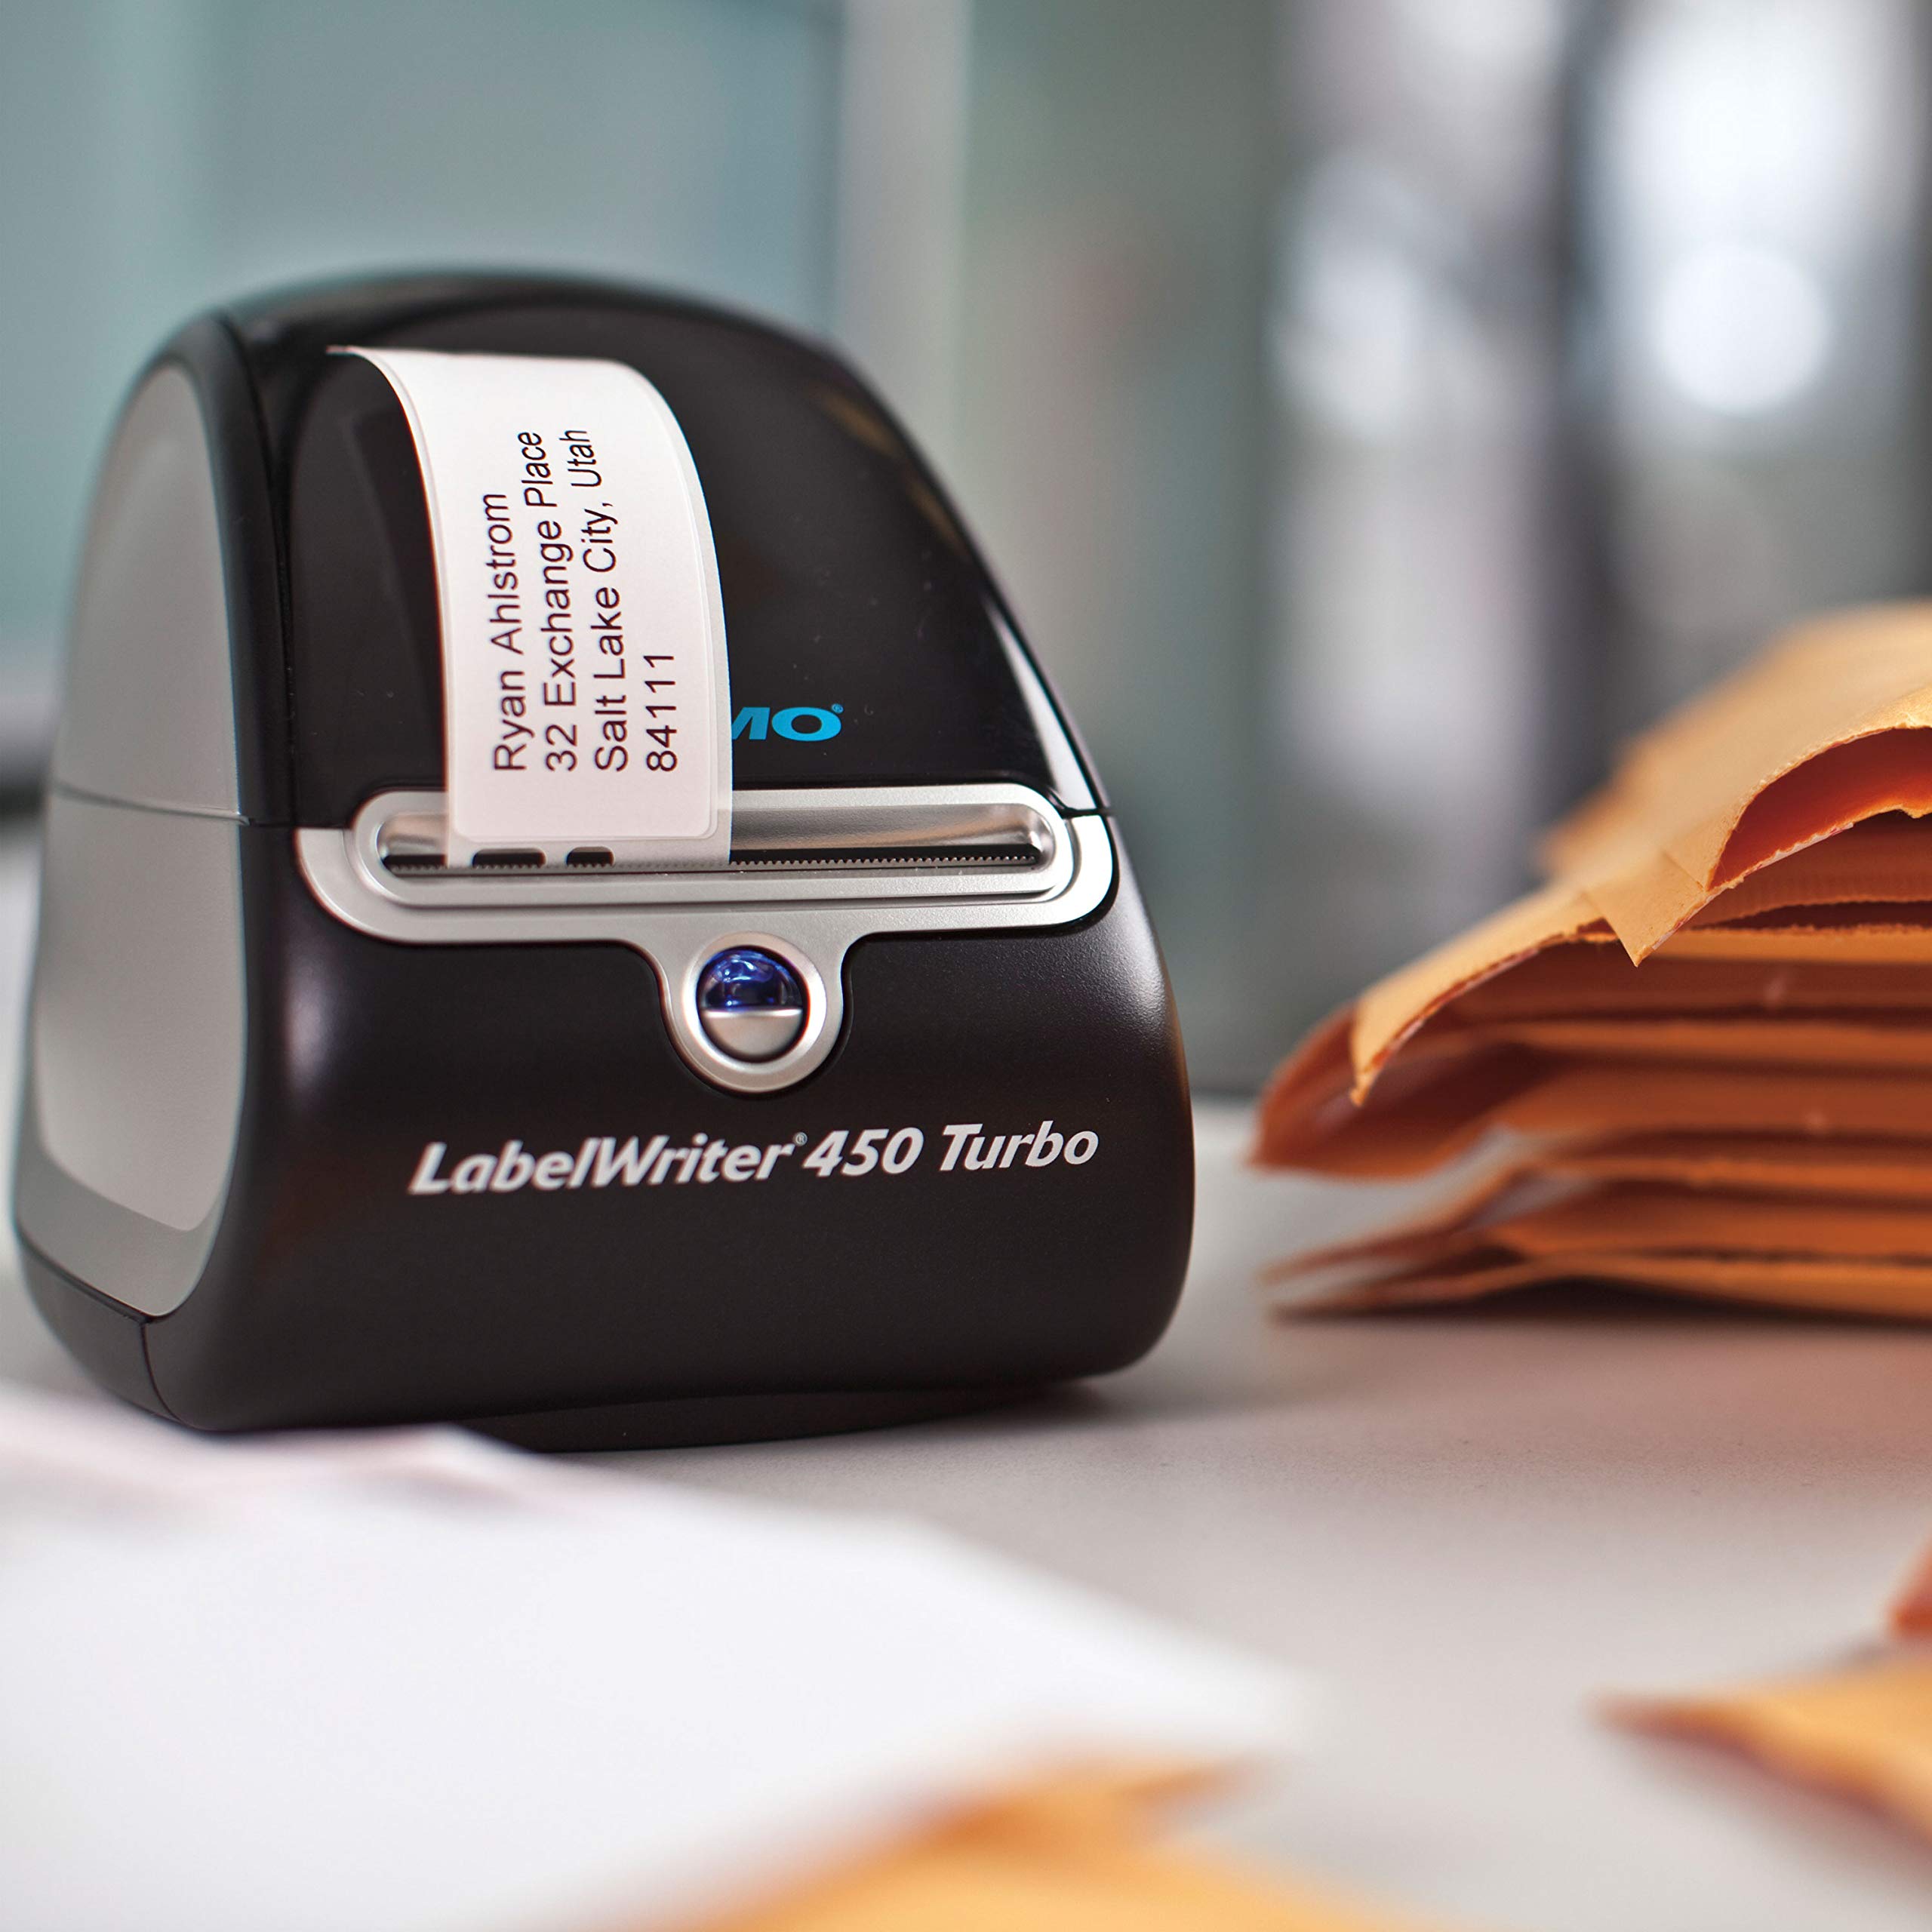 DYMO Label Printer | LabelWriter 450 Turbo Direct Thermal Label Printer, Fast Printing, Great for Labeling, Filing, Mailing, Barcodes and More, Home & Office Organization